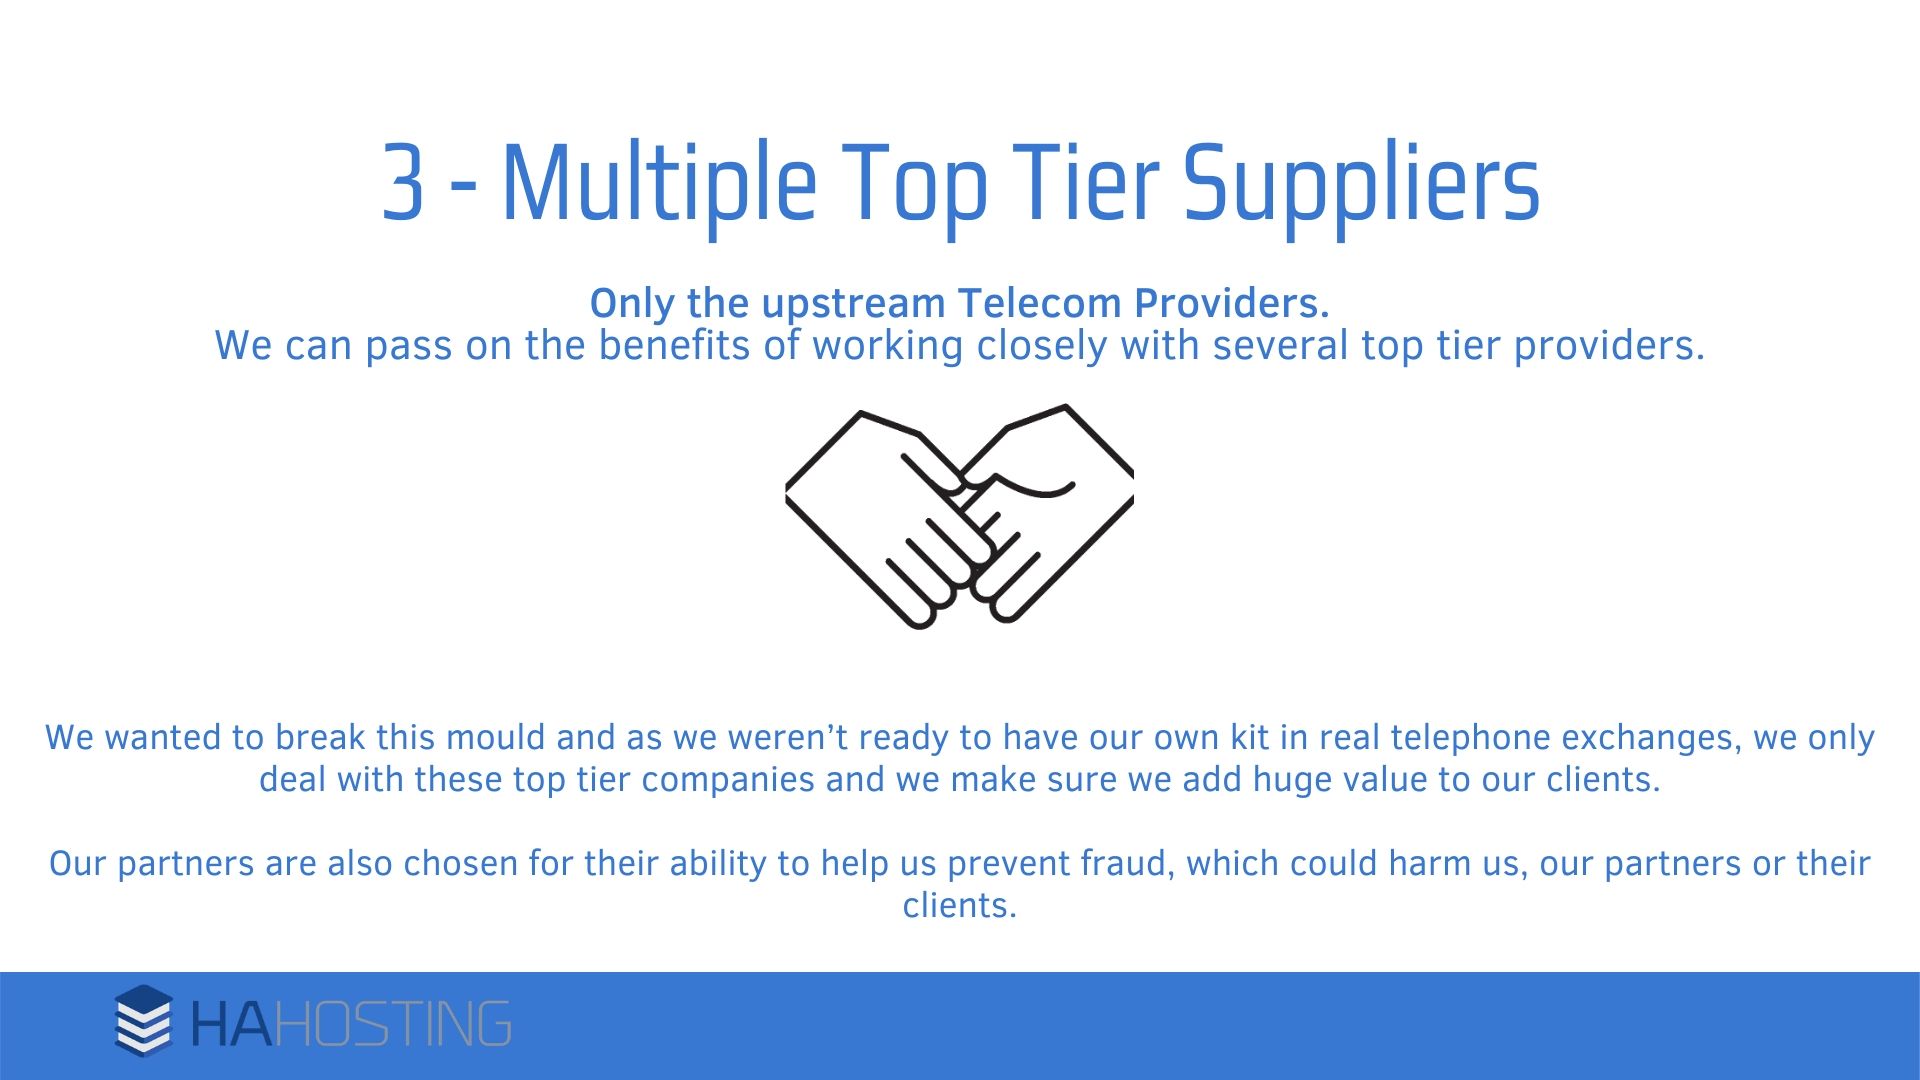 multiple top tier suppliers - We wanted to break this mould and as we weren’t ready to have our own kit in real telephone exchanges, we only deal with these top tier companies and we make sure we add huge value to our clients. Our partners are also chosen for their ability to help us prevent fraud, which could harm us, our partners or their clients.